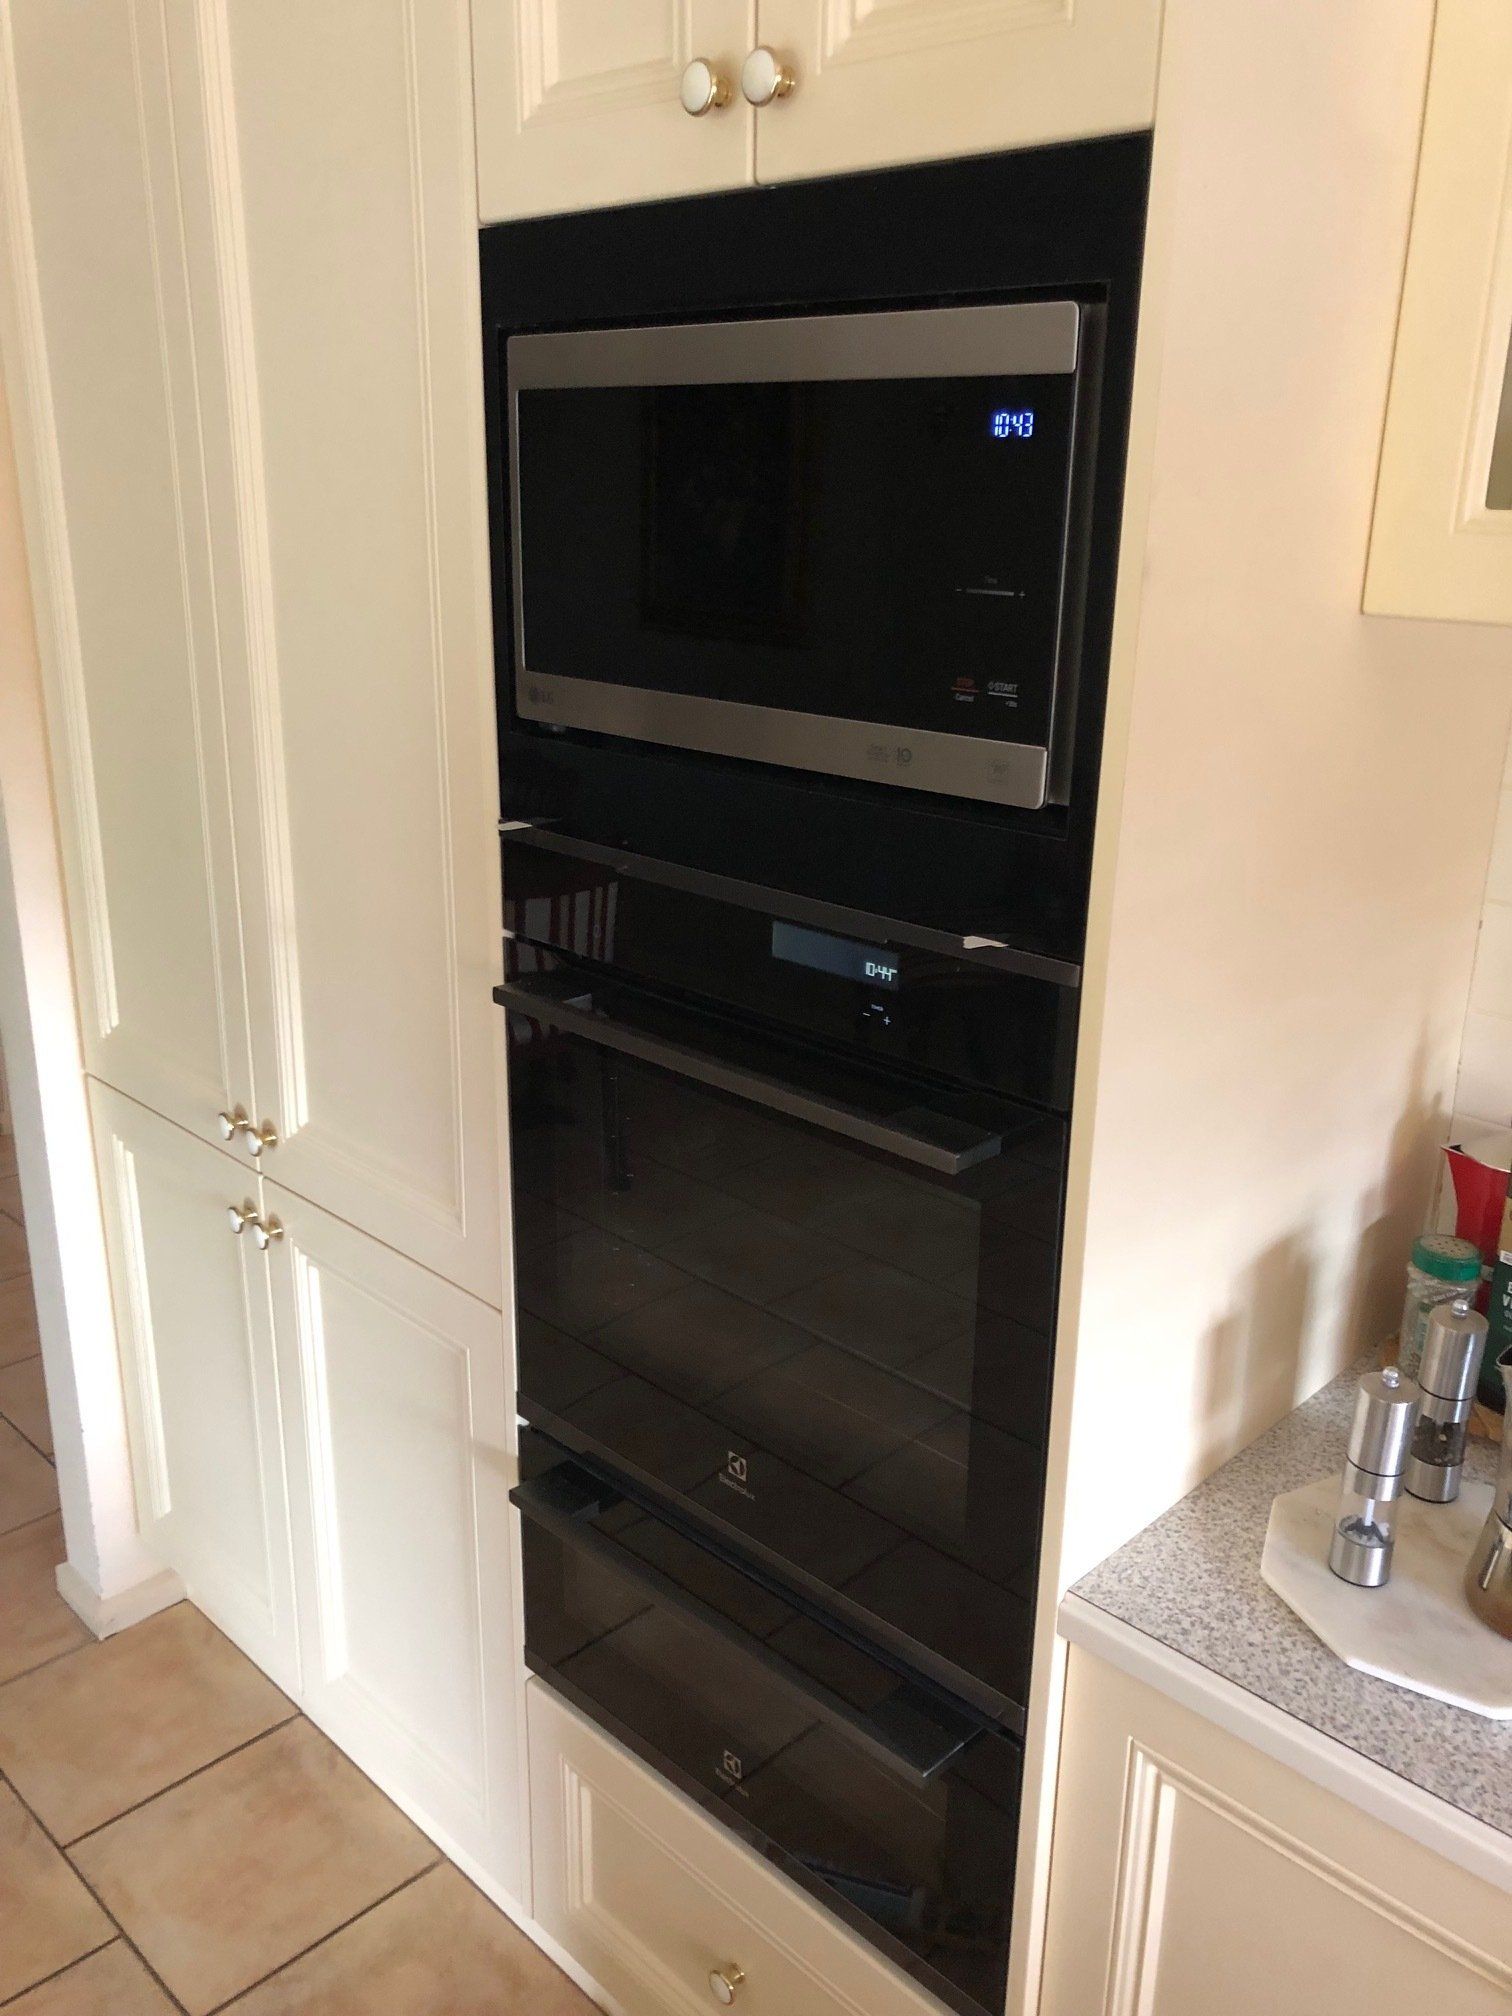 Cooktop & Oven Installations Melbourne